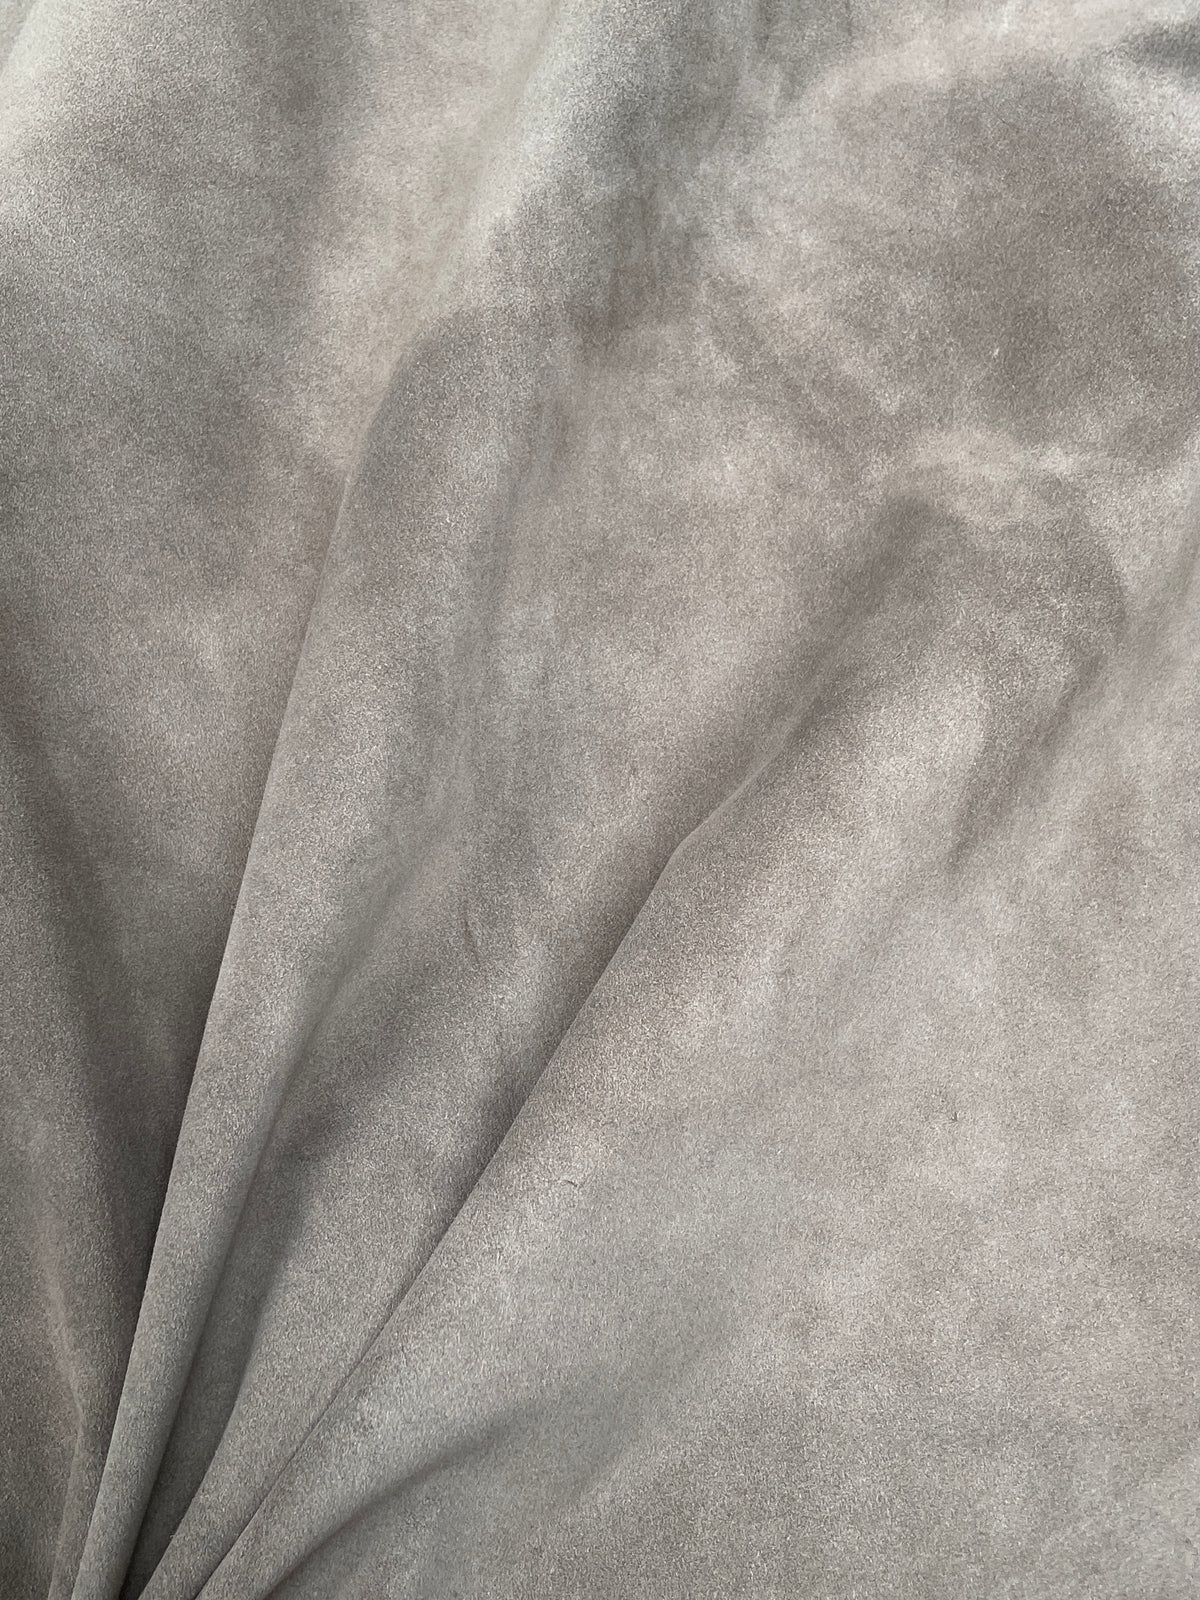 Suede Grey Calf Double Butt | 0.8mm | 6 sq.ft | $65 ea.